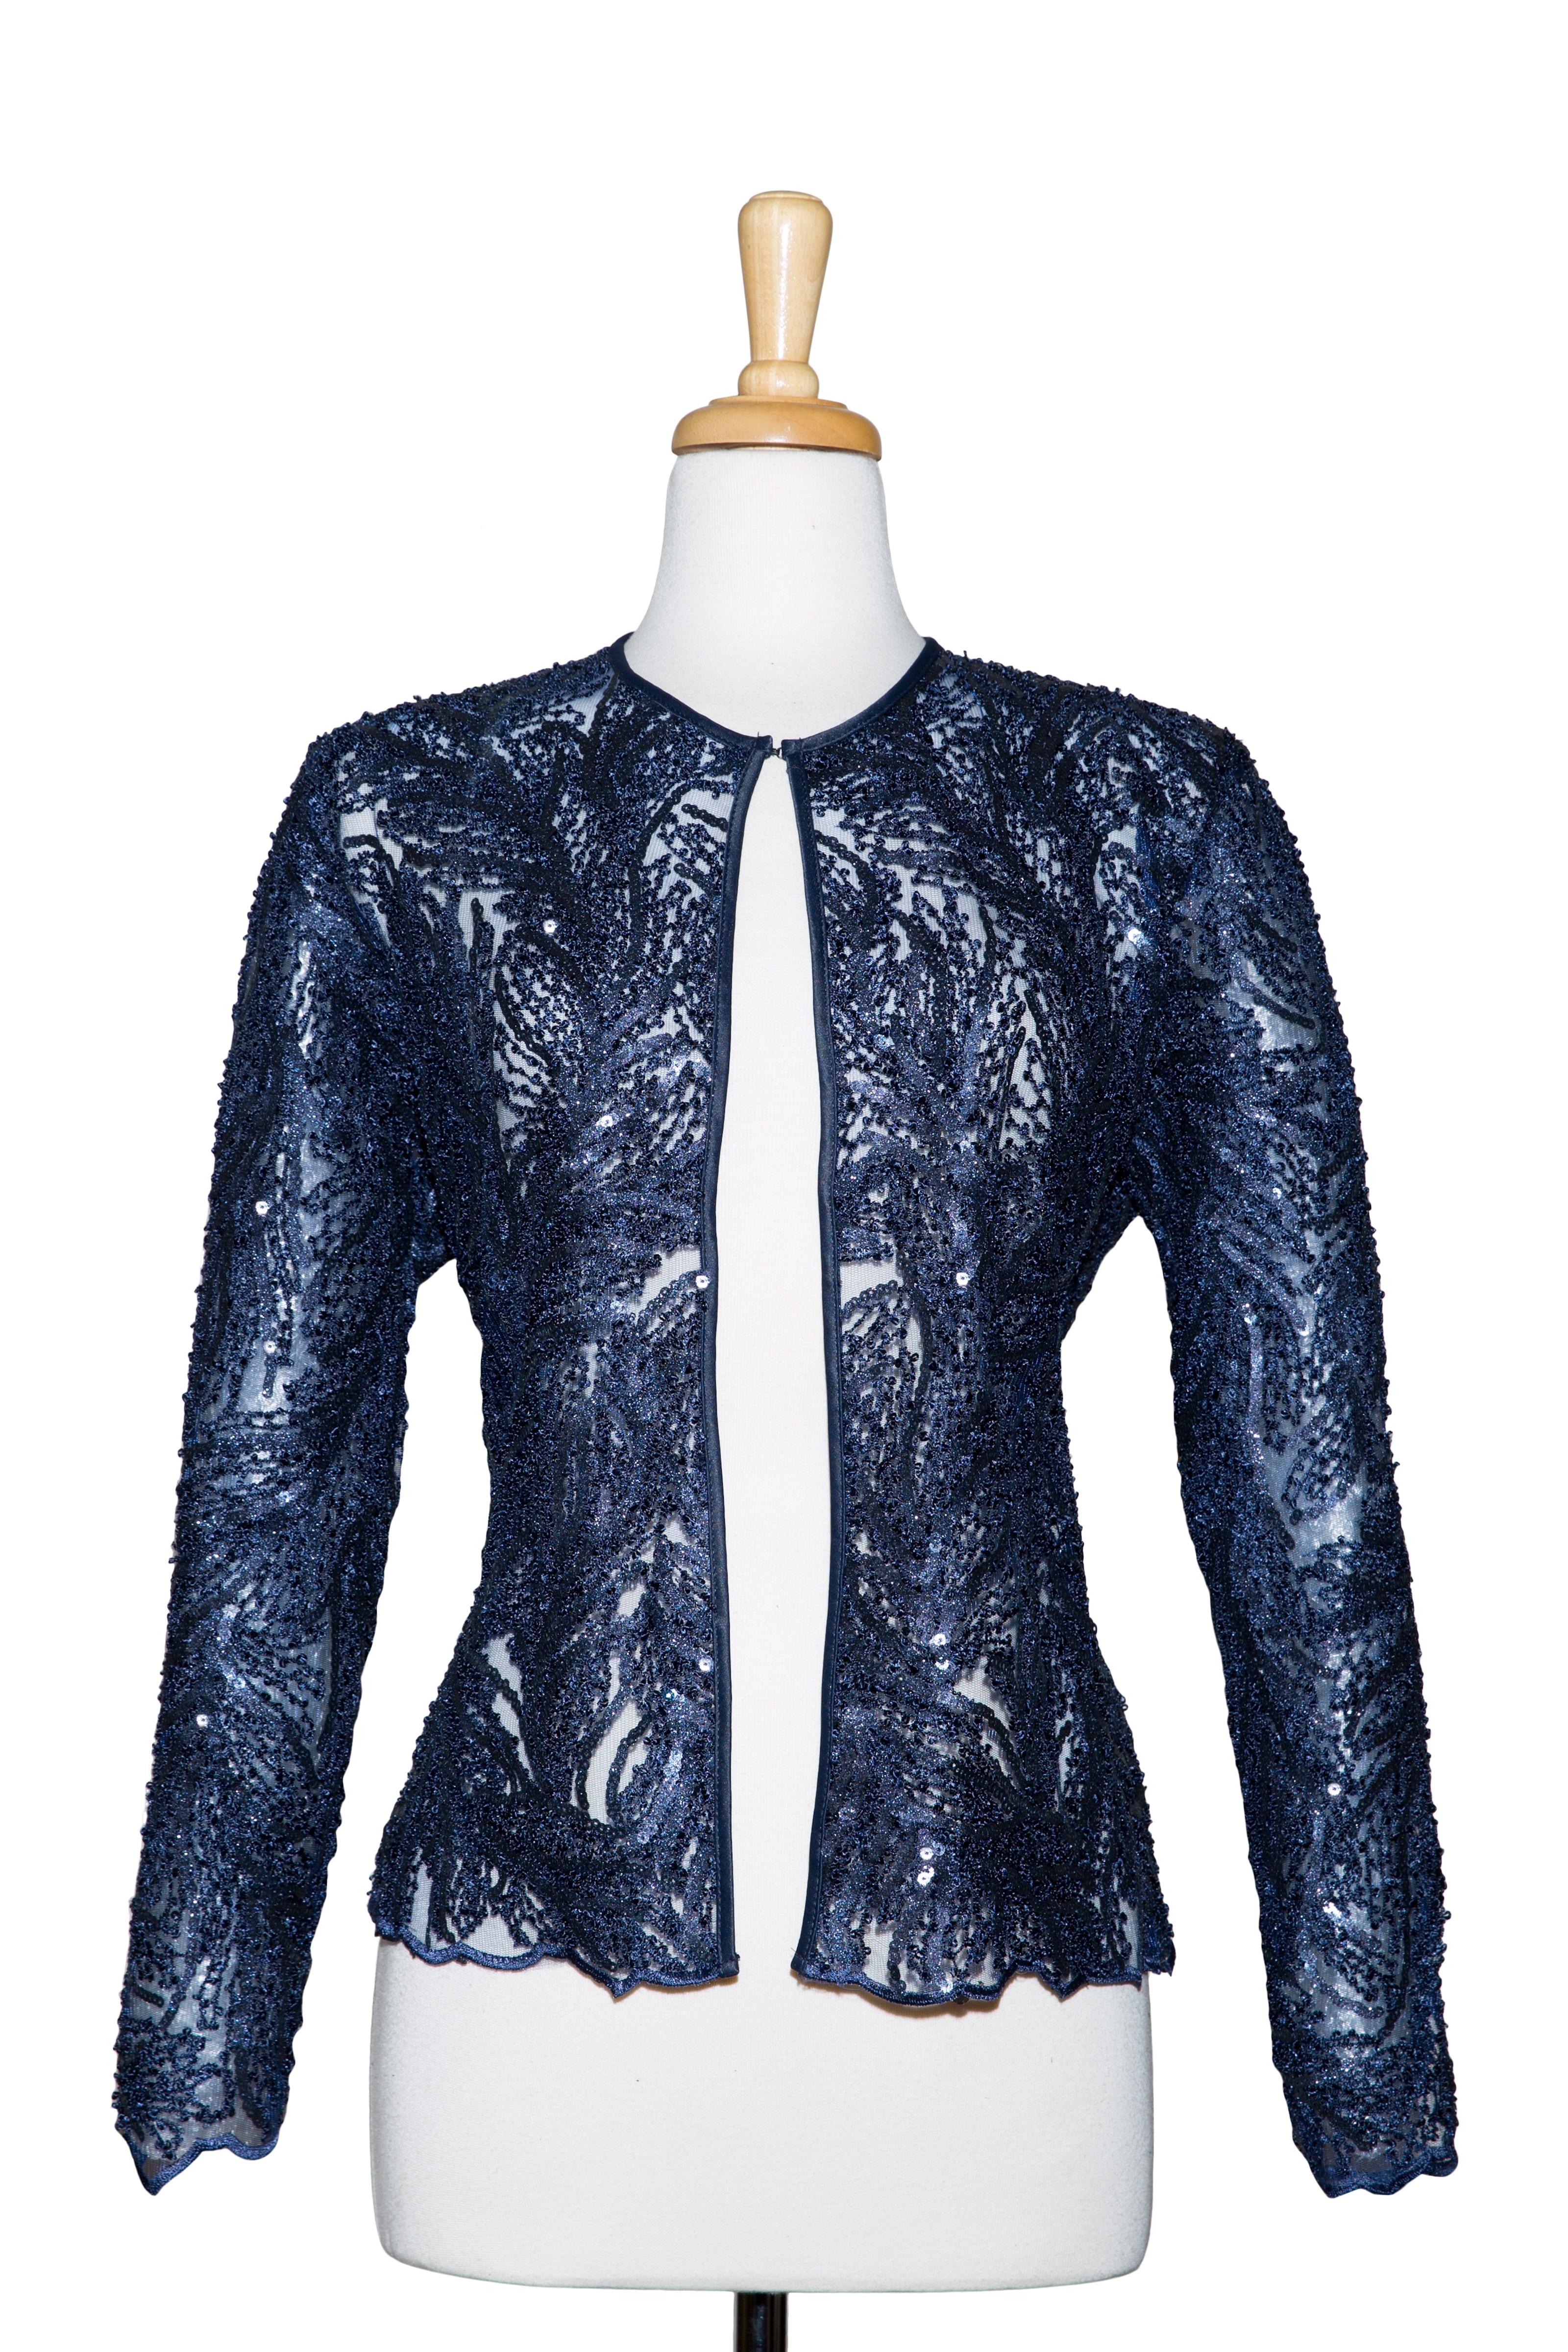  Navy Boucle Sequins Lace  Jacket 